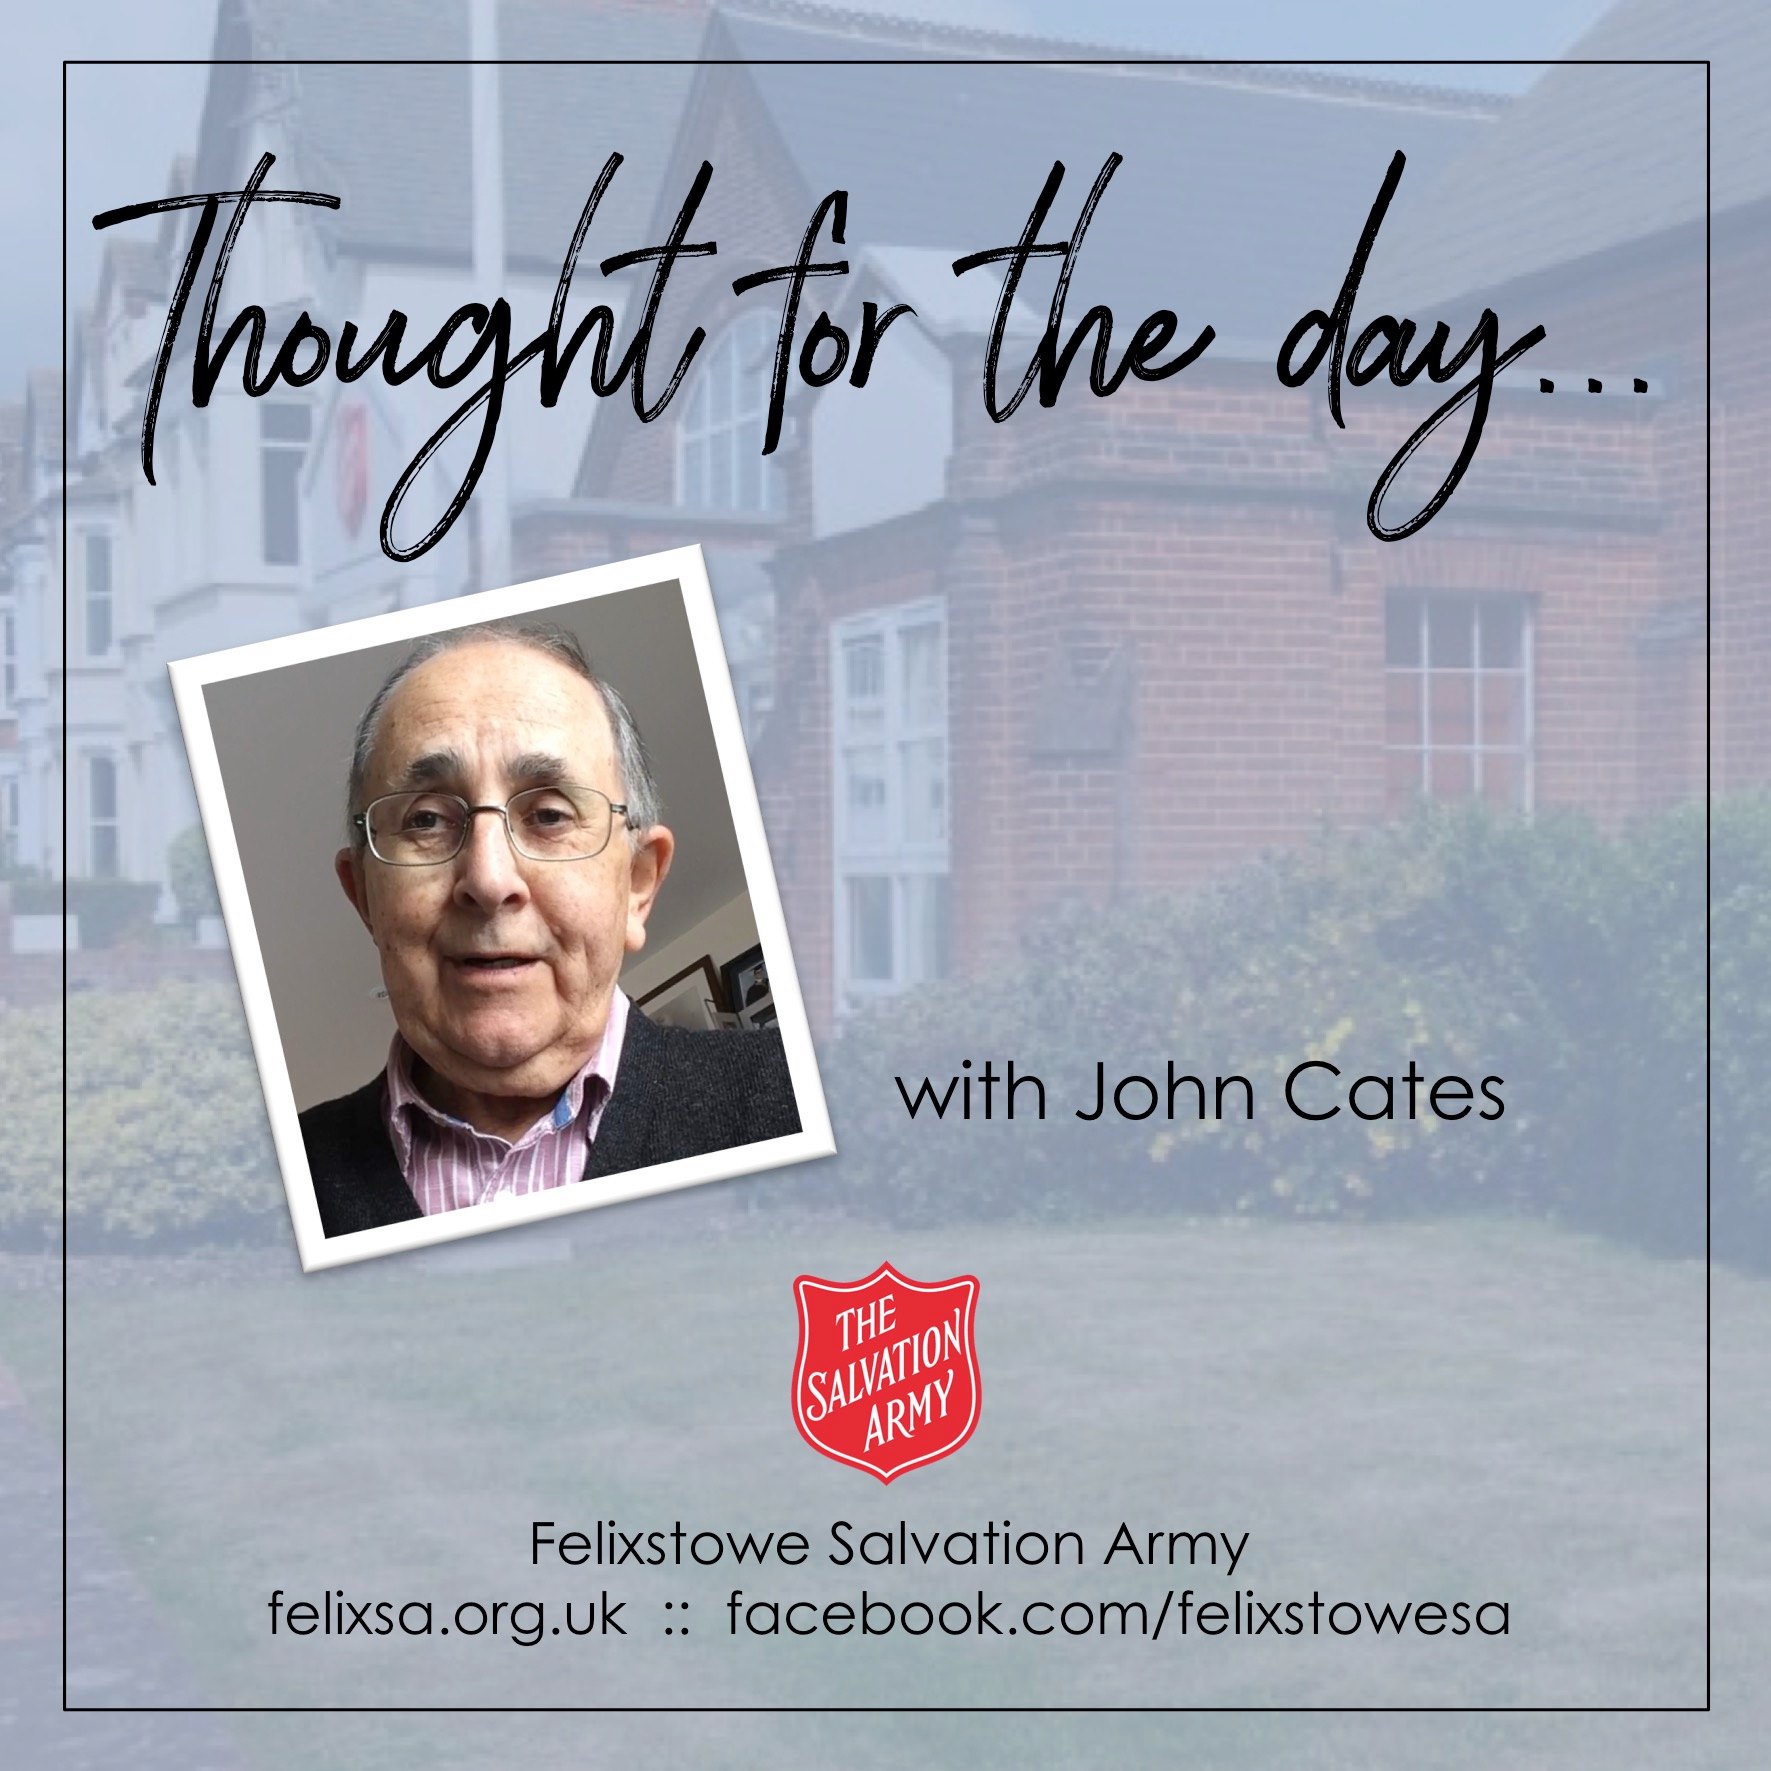 Thought for the Day with John Cates